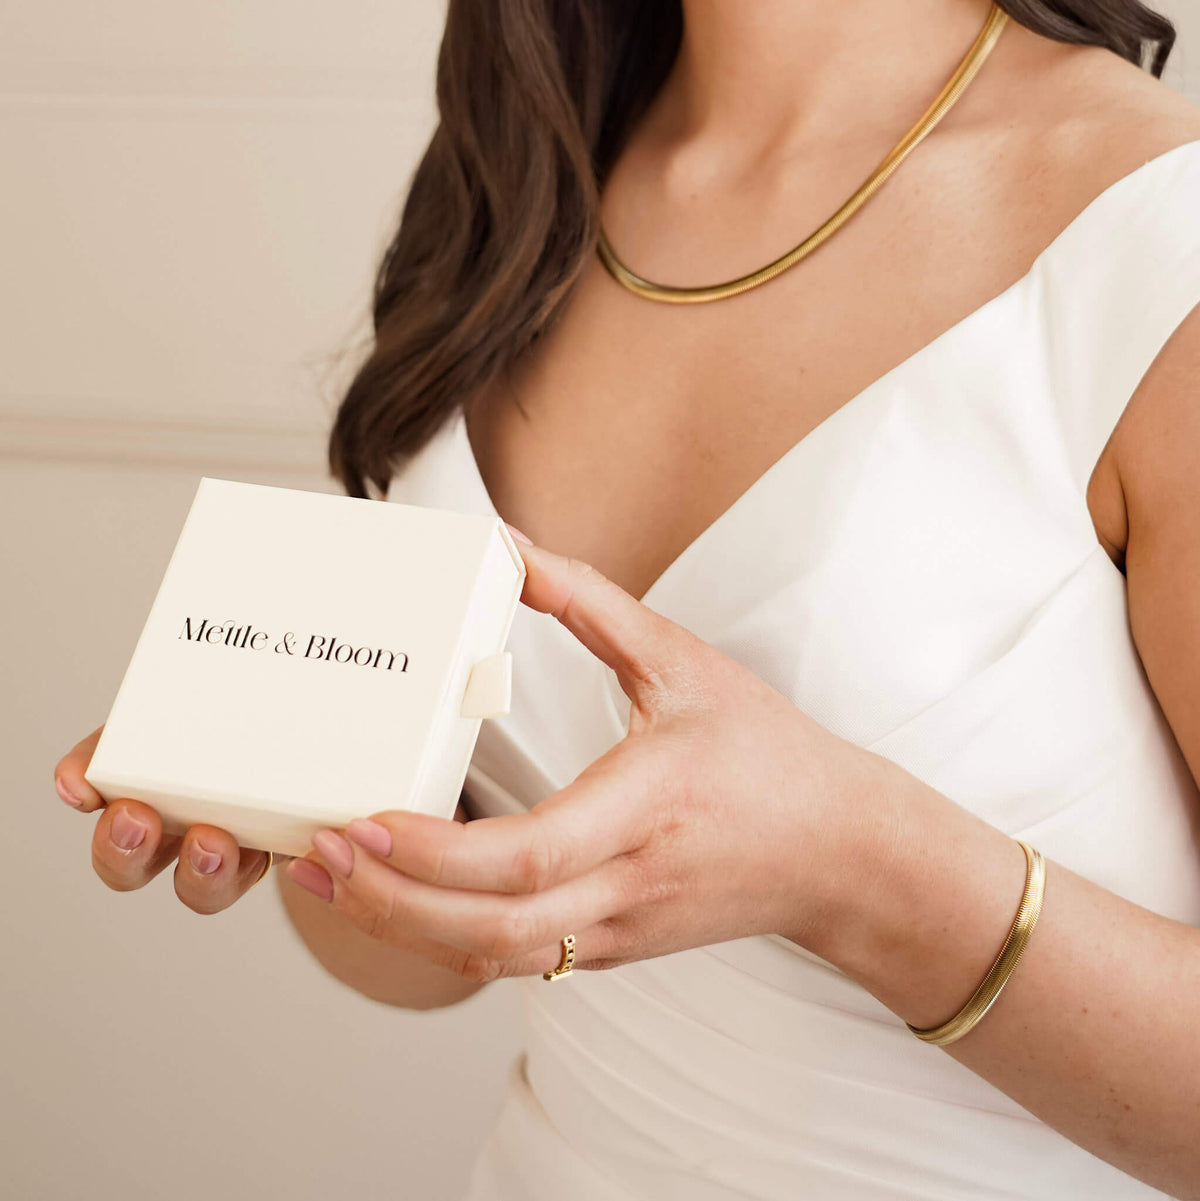 matching bracelet and necklace are worn by a bride in a wedding dress. She is wearing a mettle and bloom box and gifting jewelry to her bridesmaids. 